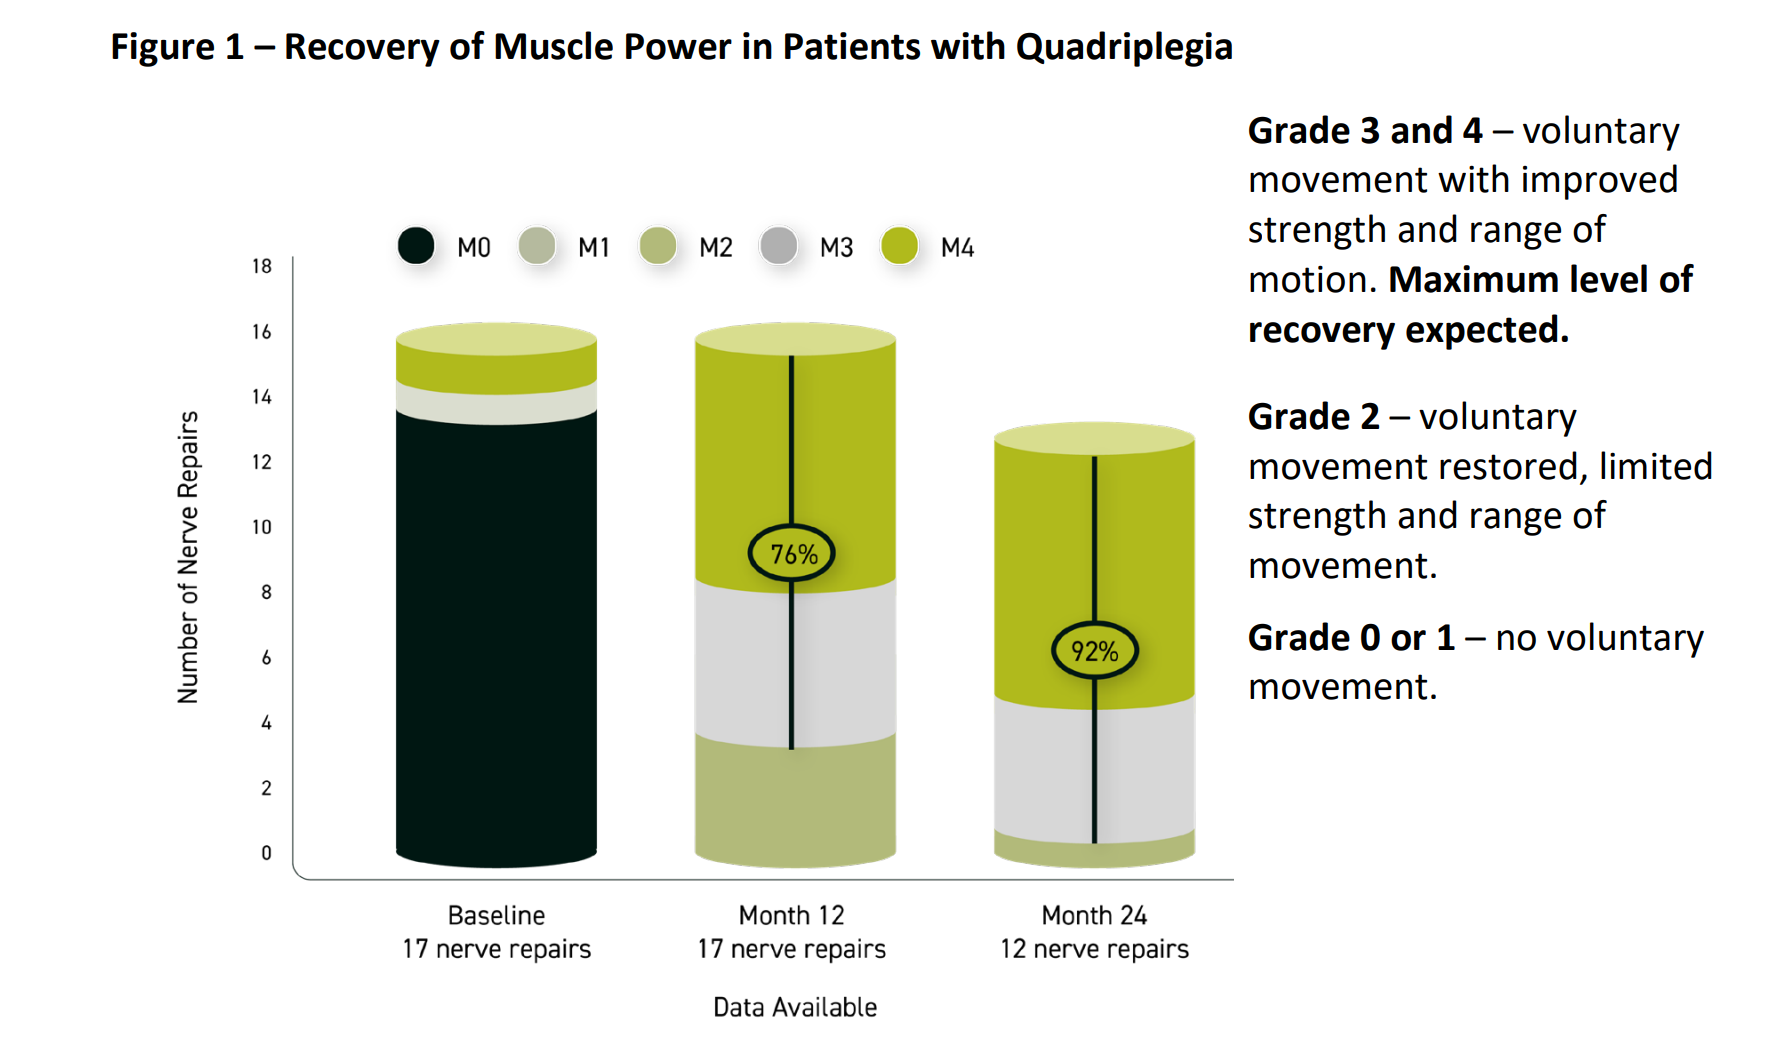 (Source: Orthocell) An infographic outlining results for Quadriplegic patients 